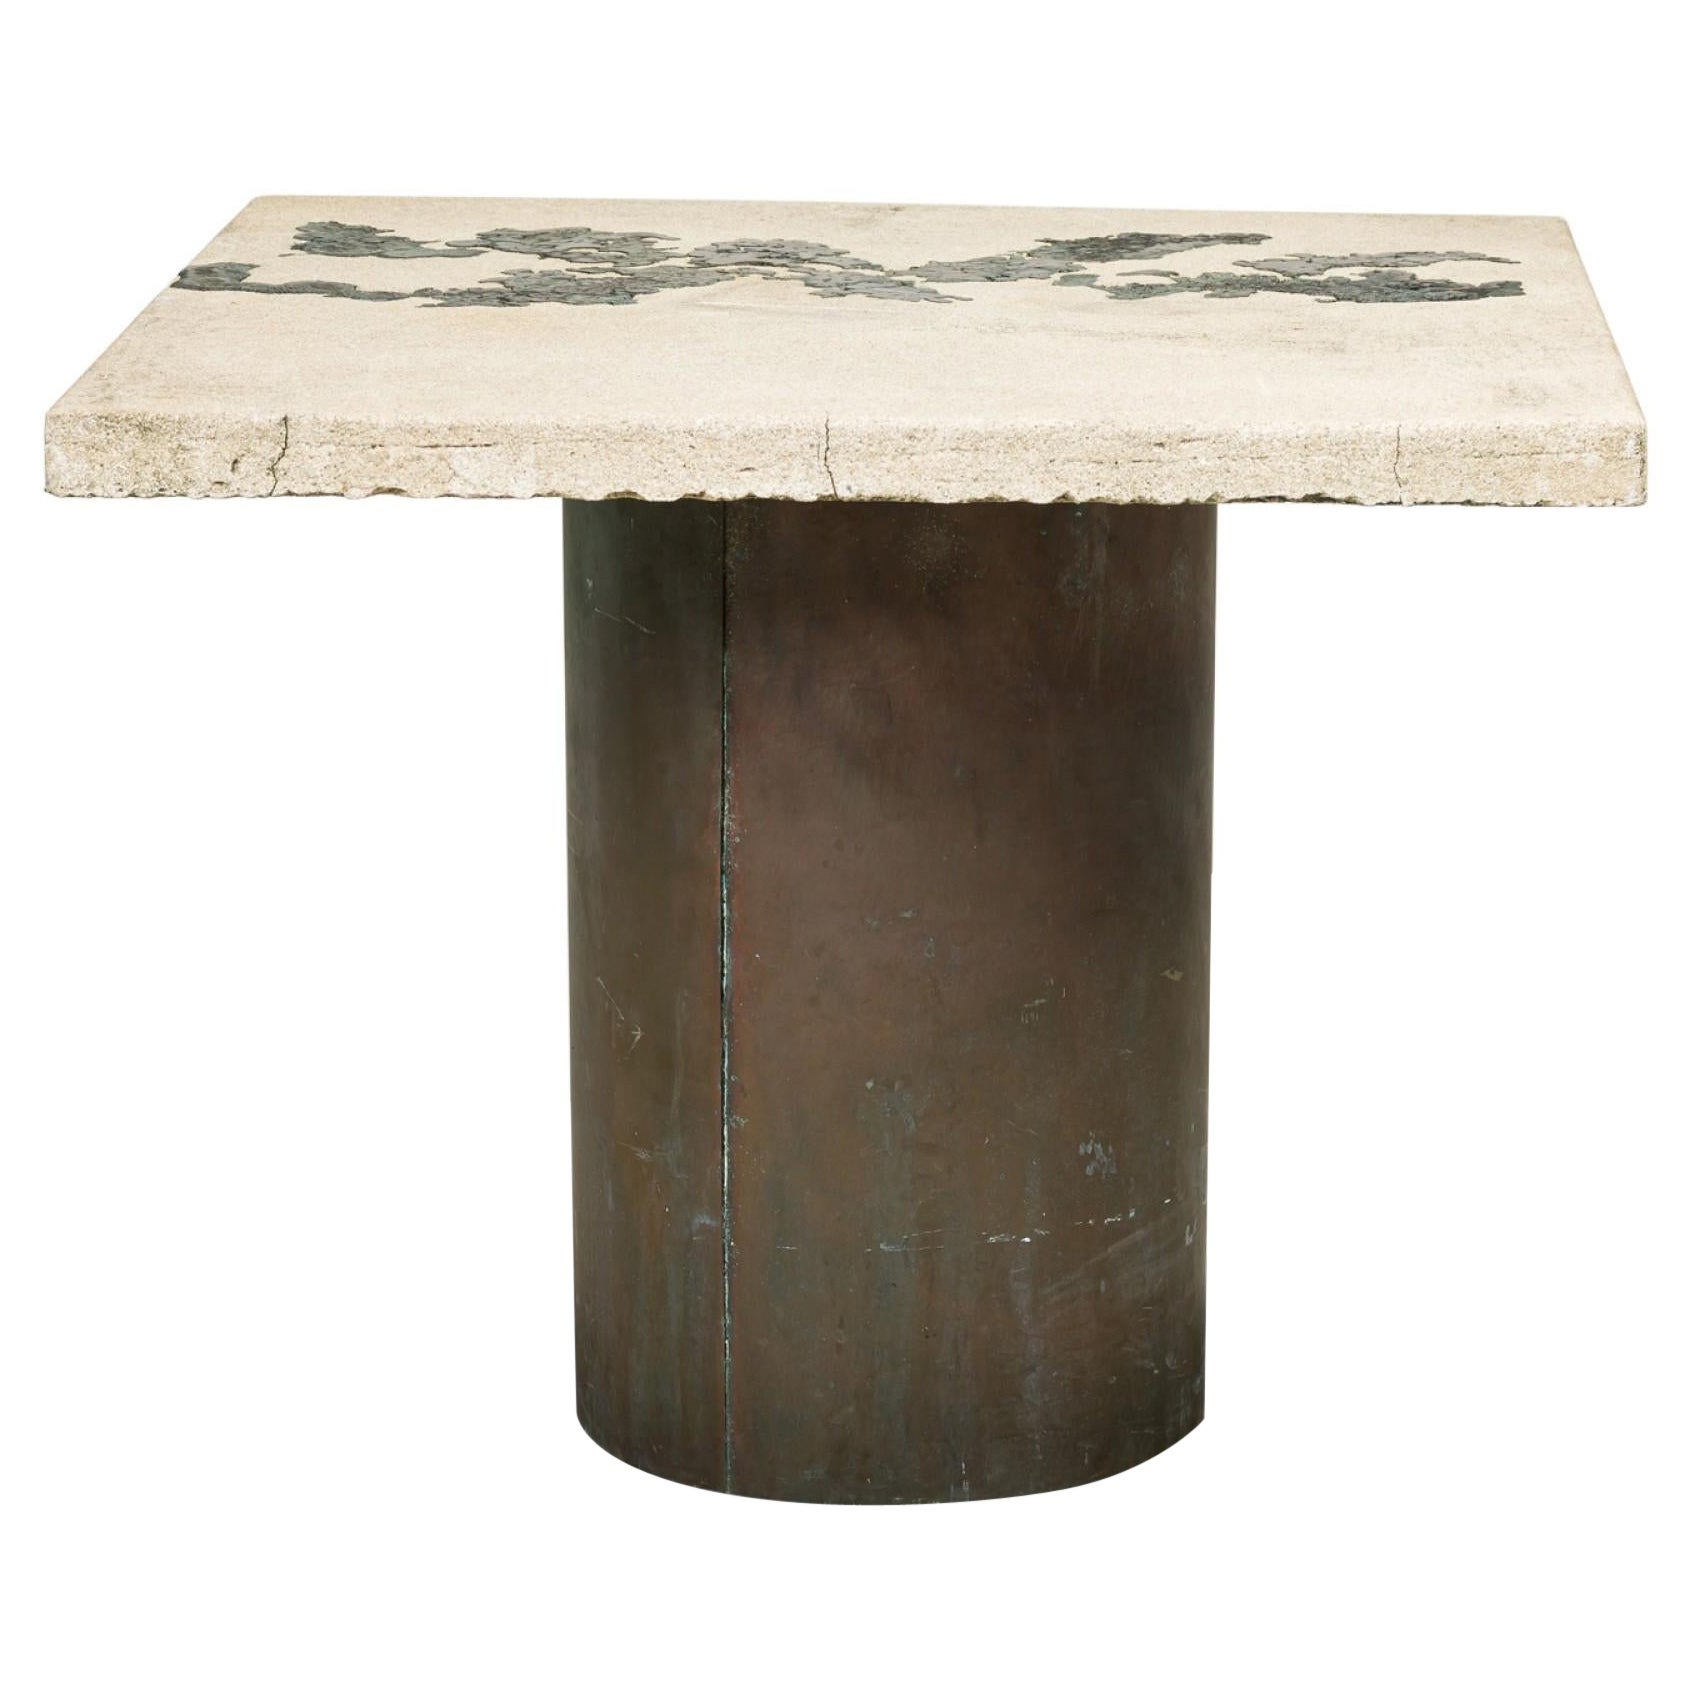 Silas Seandel American Concrete and Bronze "Terra" Breakfast / Card / Game Table For Sale